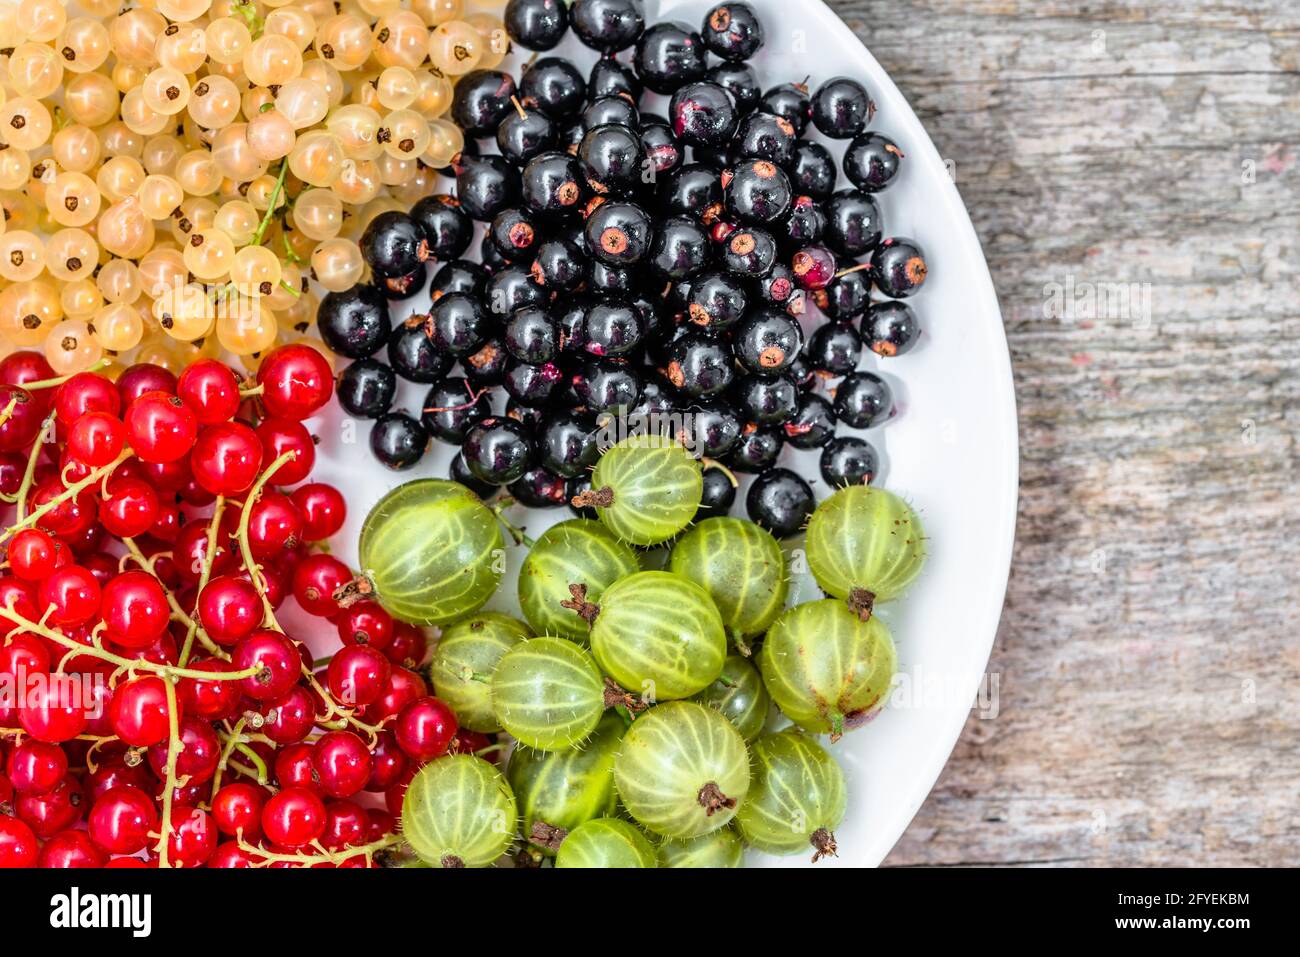 Summer fruits varieties: red currants, white currants and blackcurrants on plate, top view Stock Photo